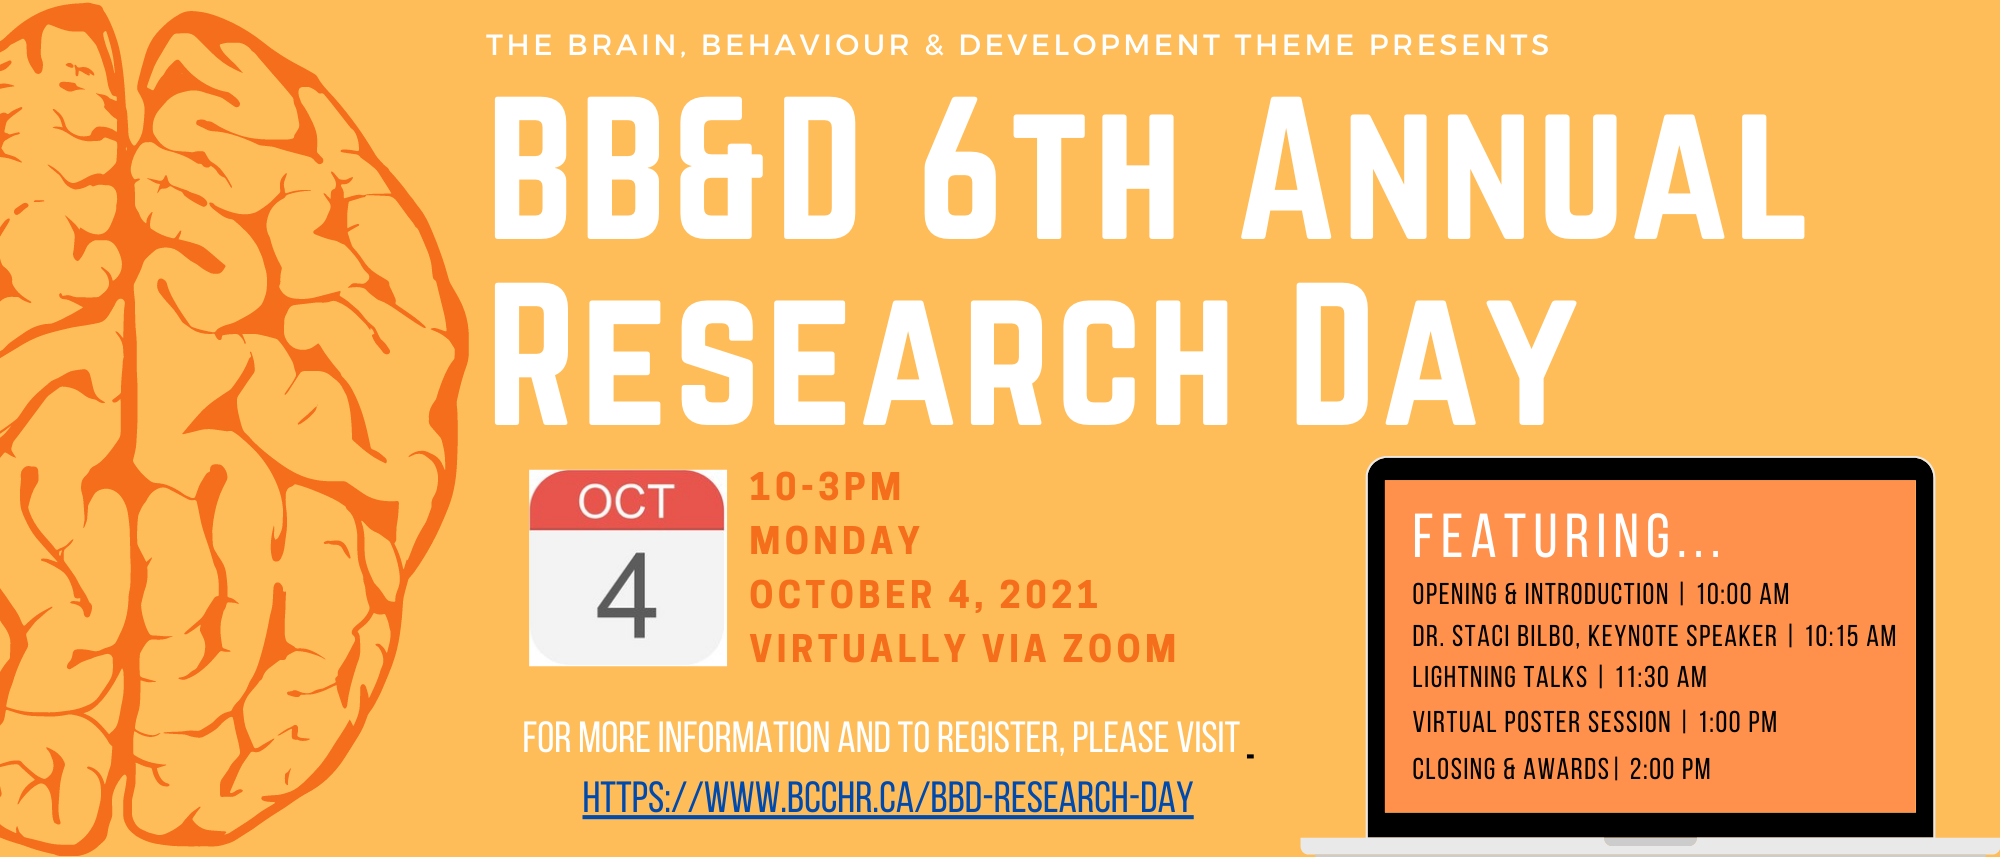 BB&D 6th Annual Research Day